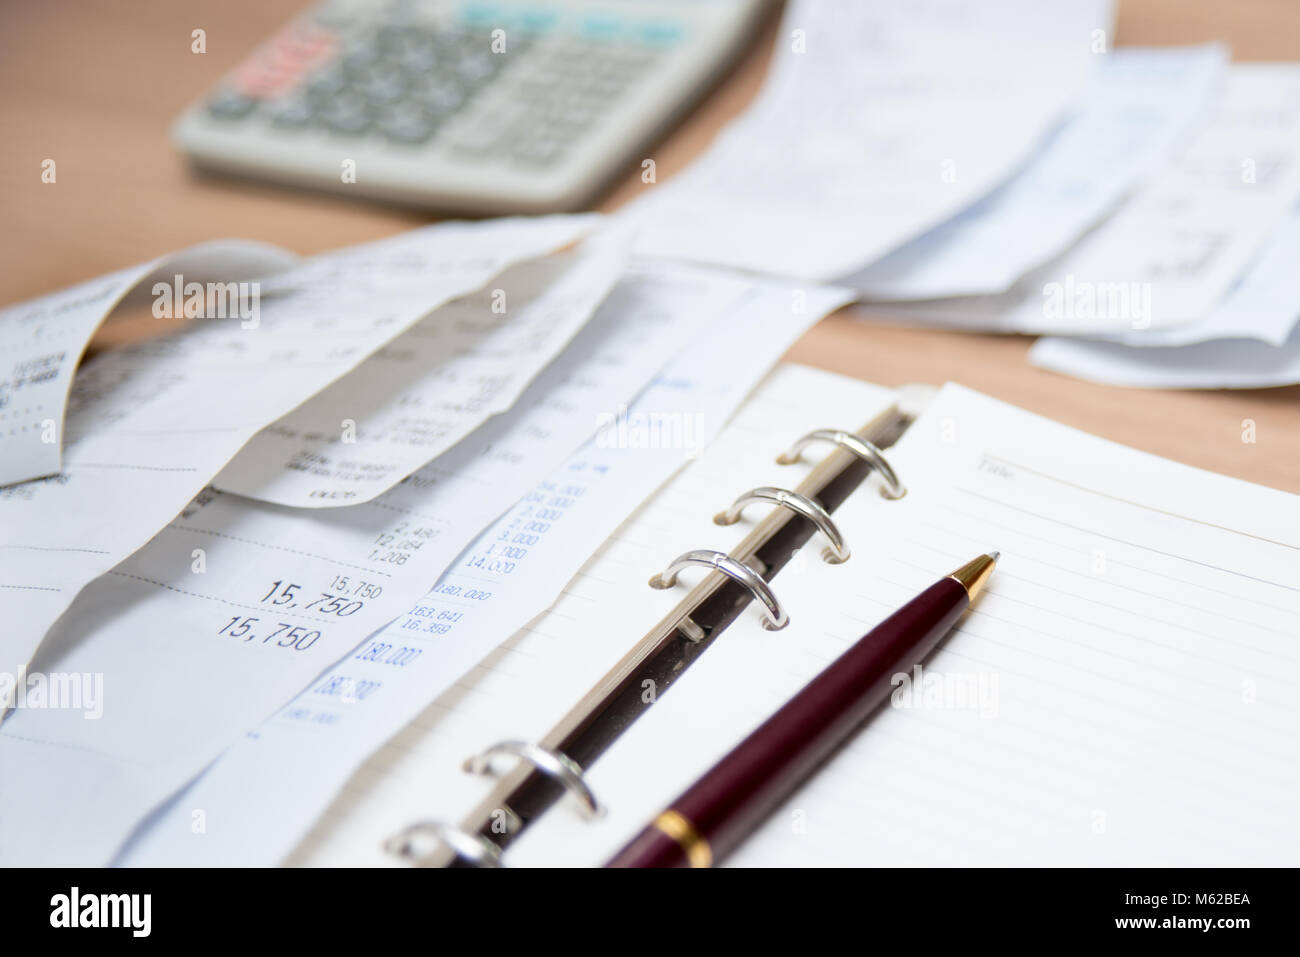 Checking receipt. Finance concept with receipts, calculators, and notes. Defocused. Stock Photo